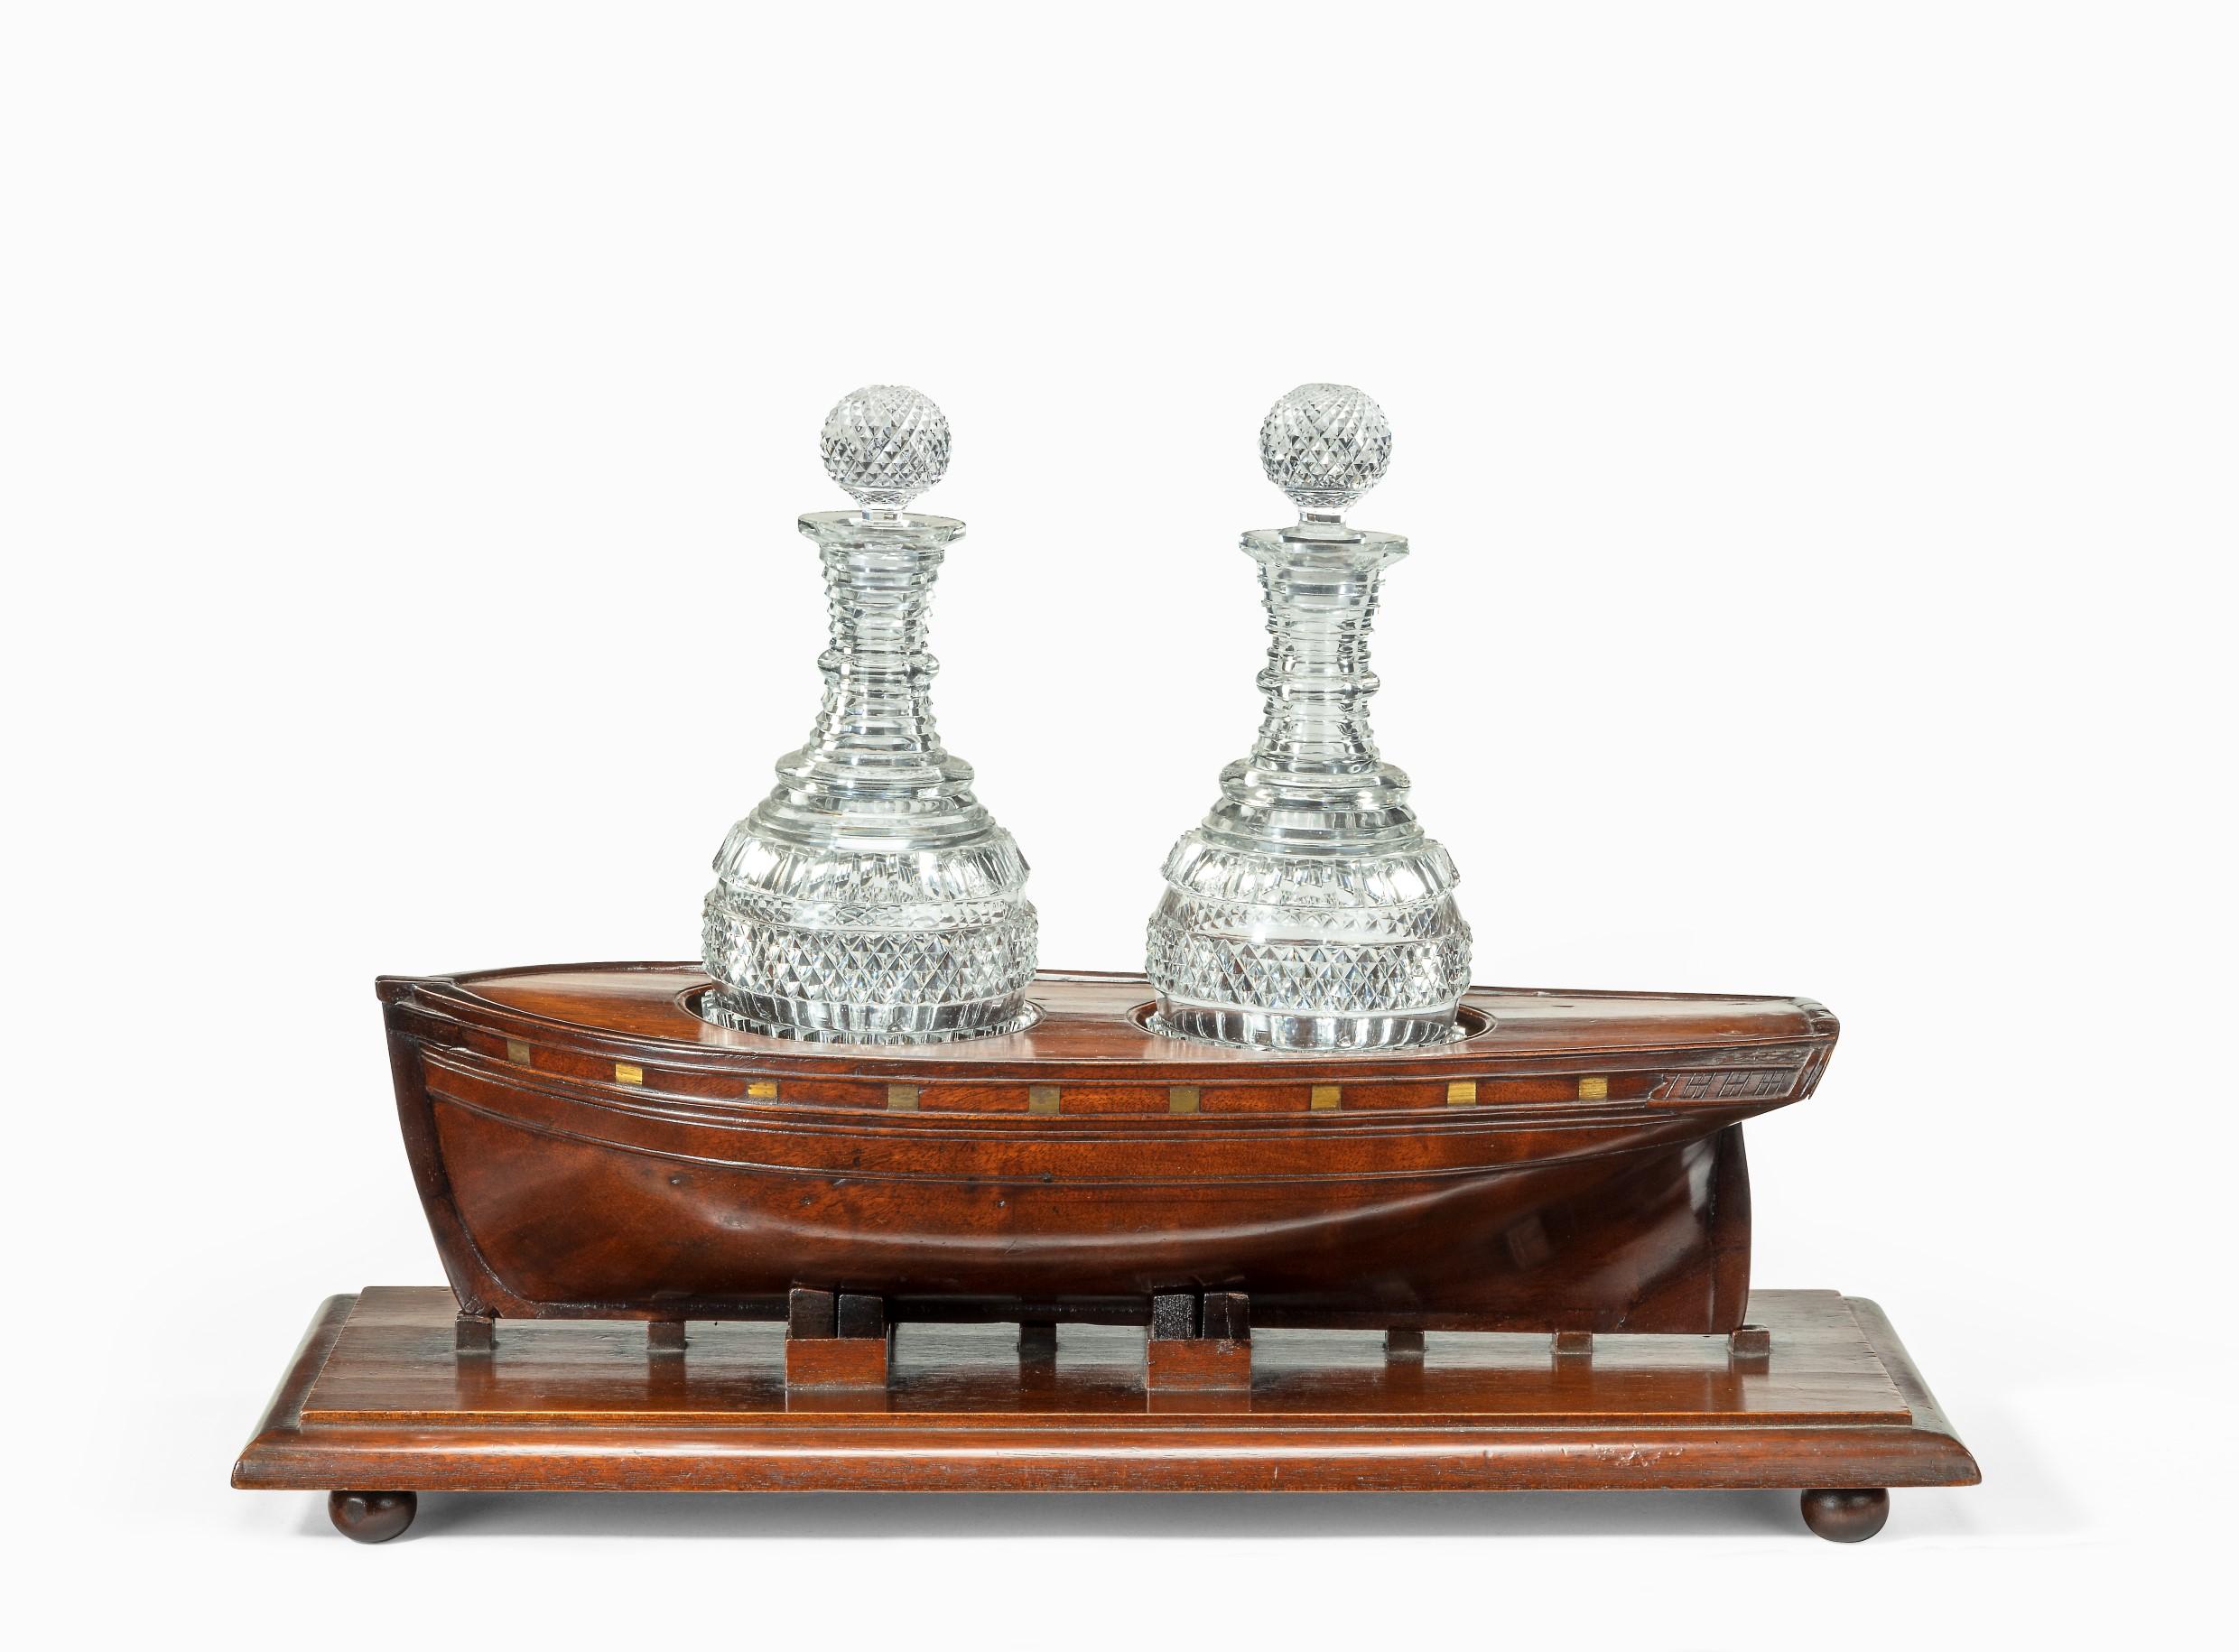 The stand for two decanters is modelled in the form of a Royal Naval ship with the original gilt gun ports. It has two circular apertures cut into the deck for a pair of cut-glass decanters and is set on dockyard building blocks. The mahogany plinth